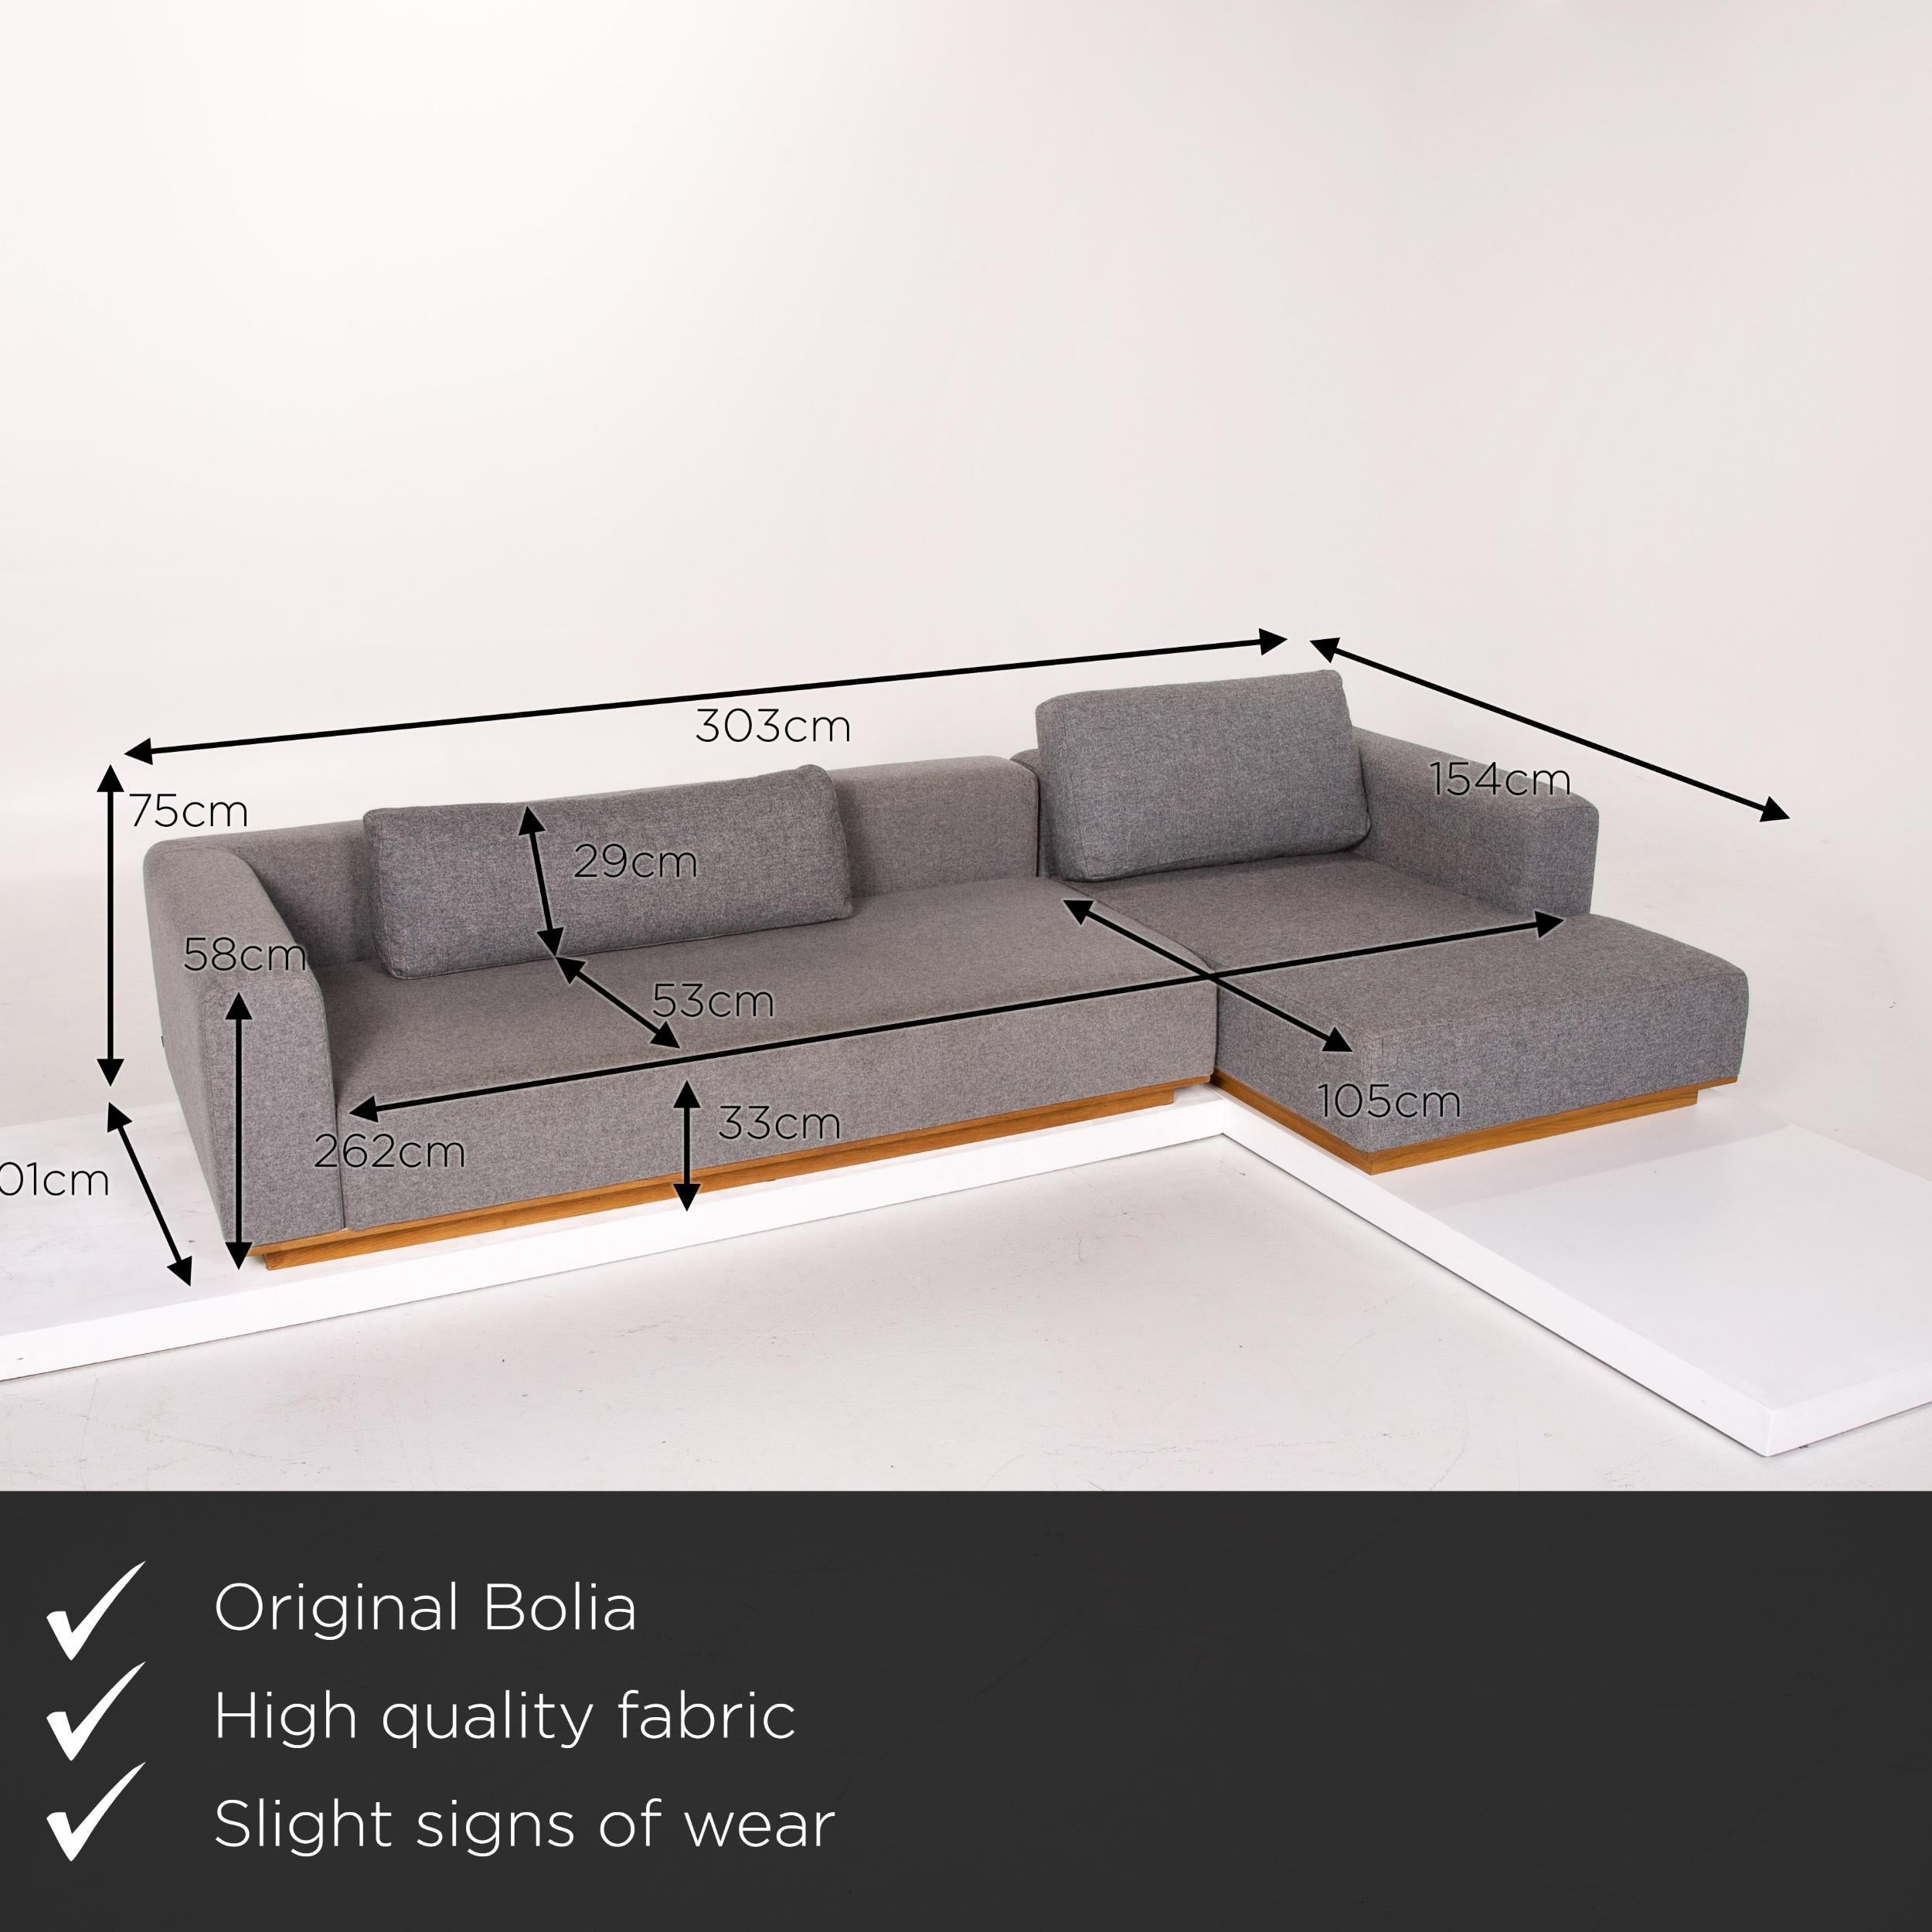 We present to you a Bolia fabric corner sofa gray felt sofa couch.
 

 Product measurements in centimeters:
 

Depth 101
Width 303
Height 75
Seat height 33
Rest height 58
Seat depth 53
Seat width 262
Back height 29.
 